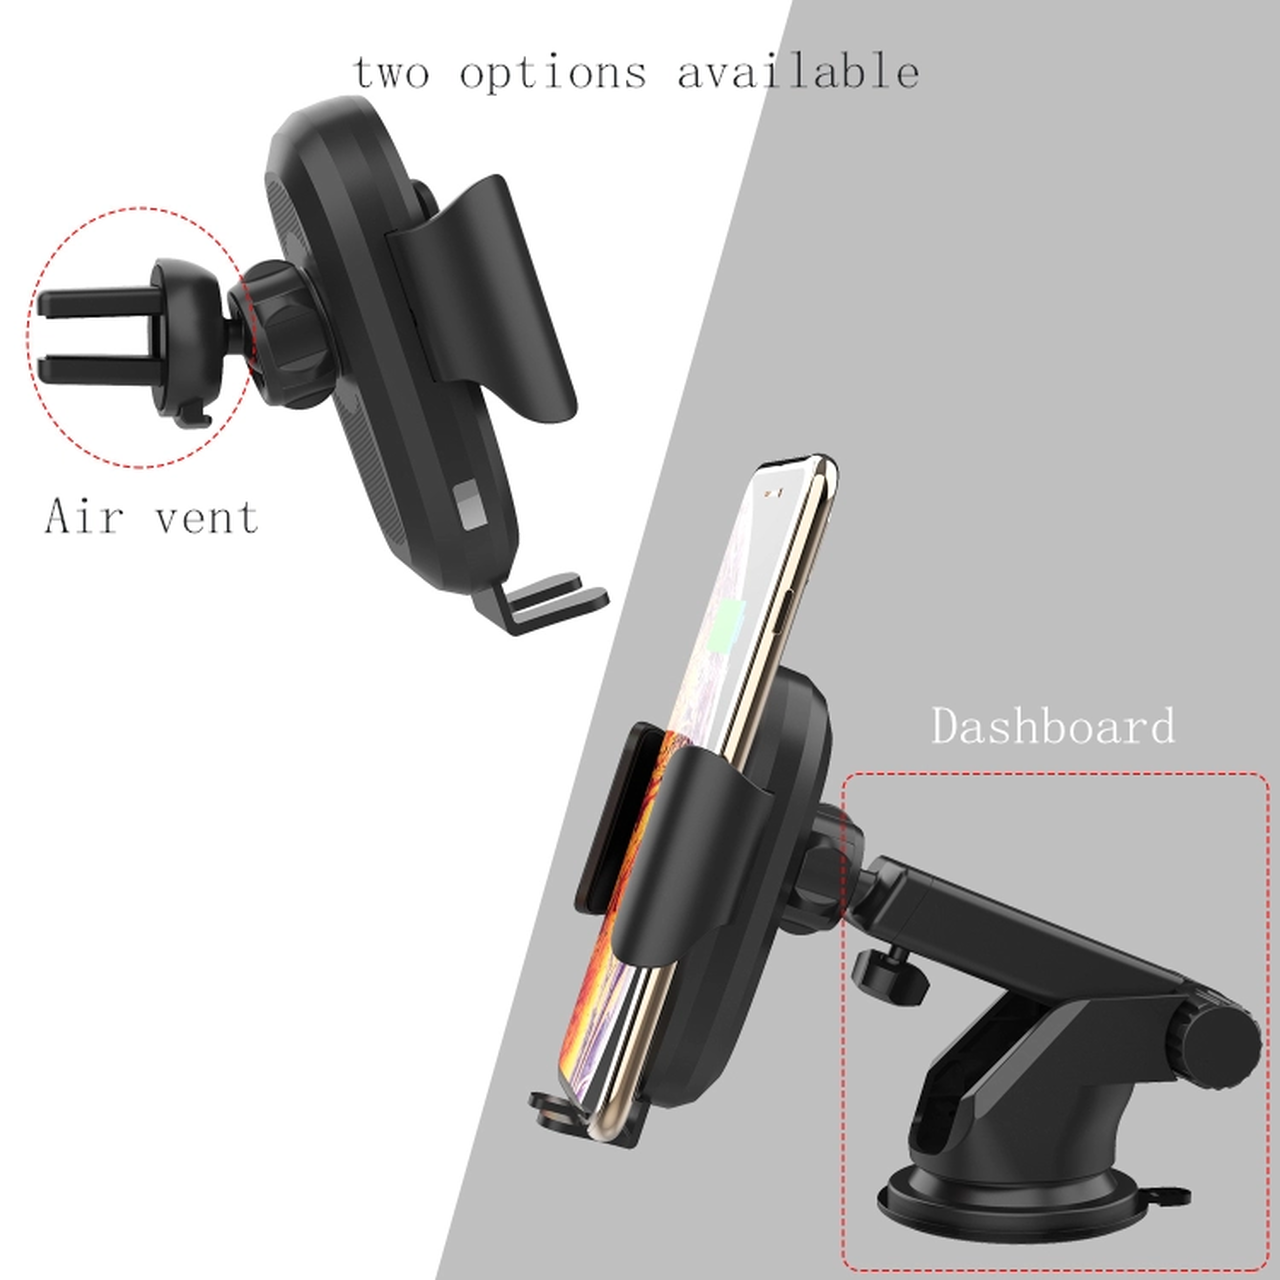 Wireless QI Car Charger Mount - Smart Infrared Sensor - For All Wireless Charging Compatible Smart Phones